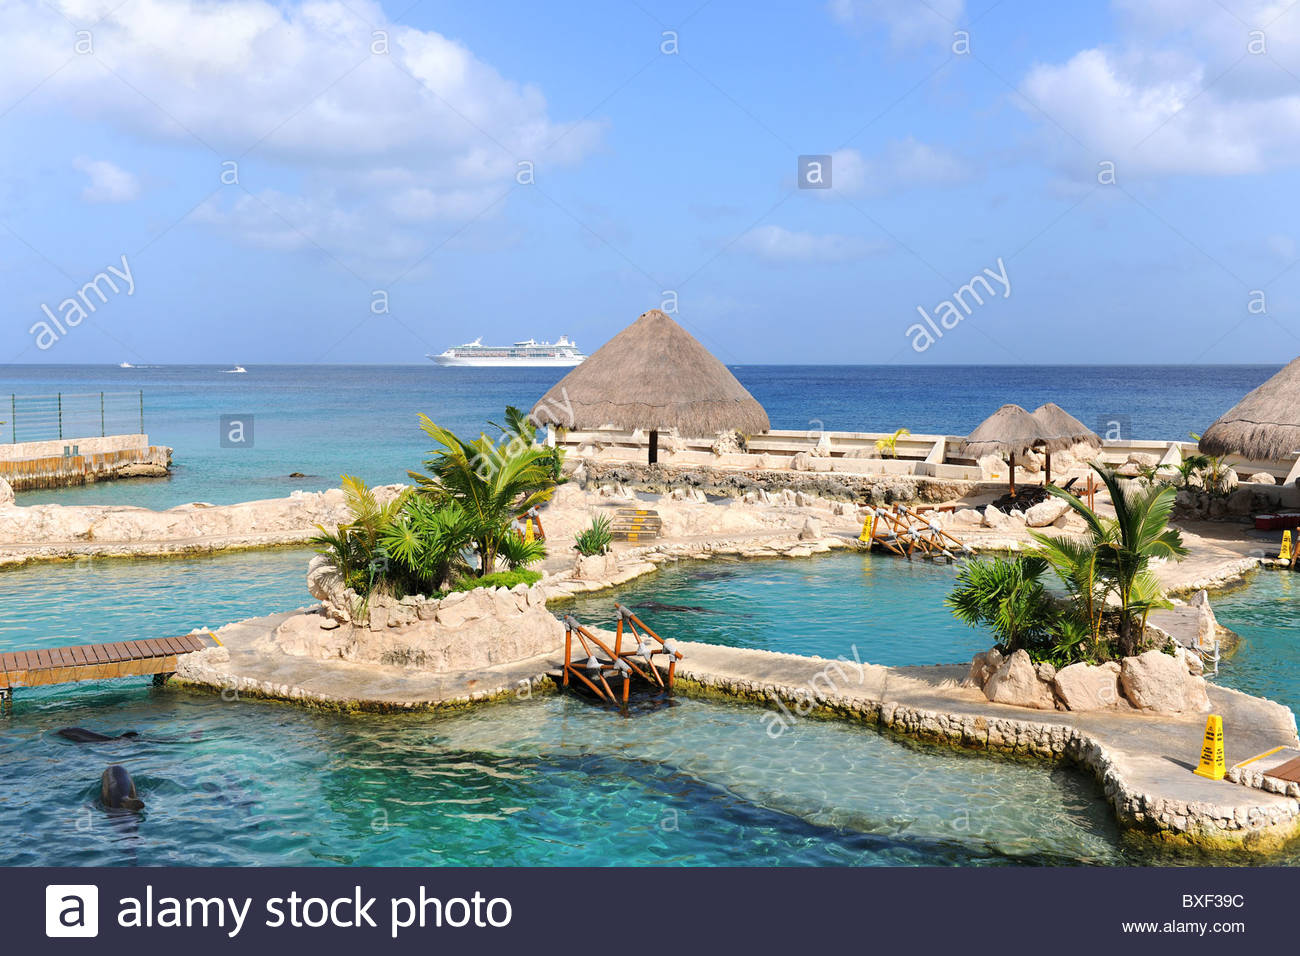 Dolphinarium In Cozumel Mexico With Cruise Ship Background